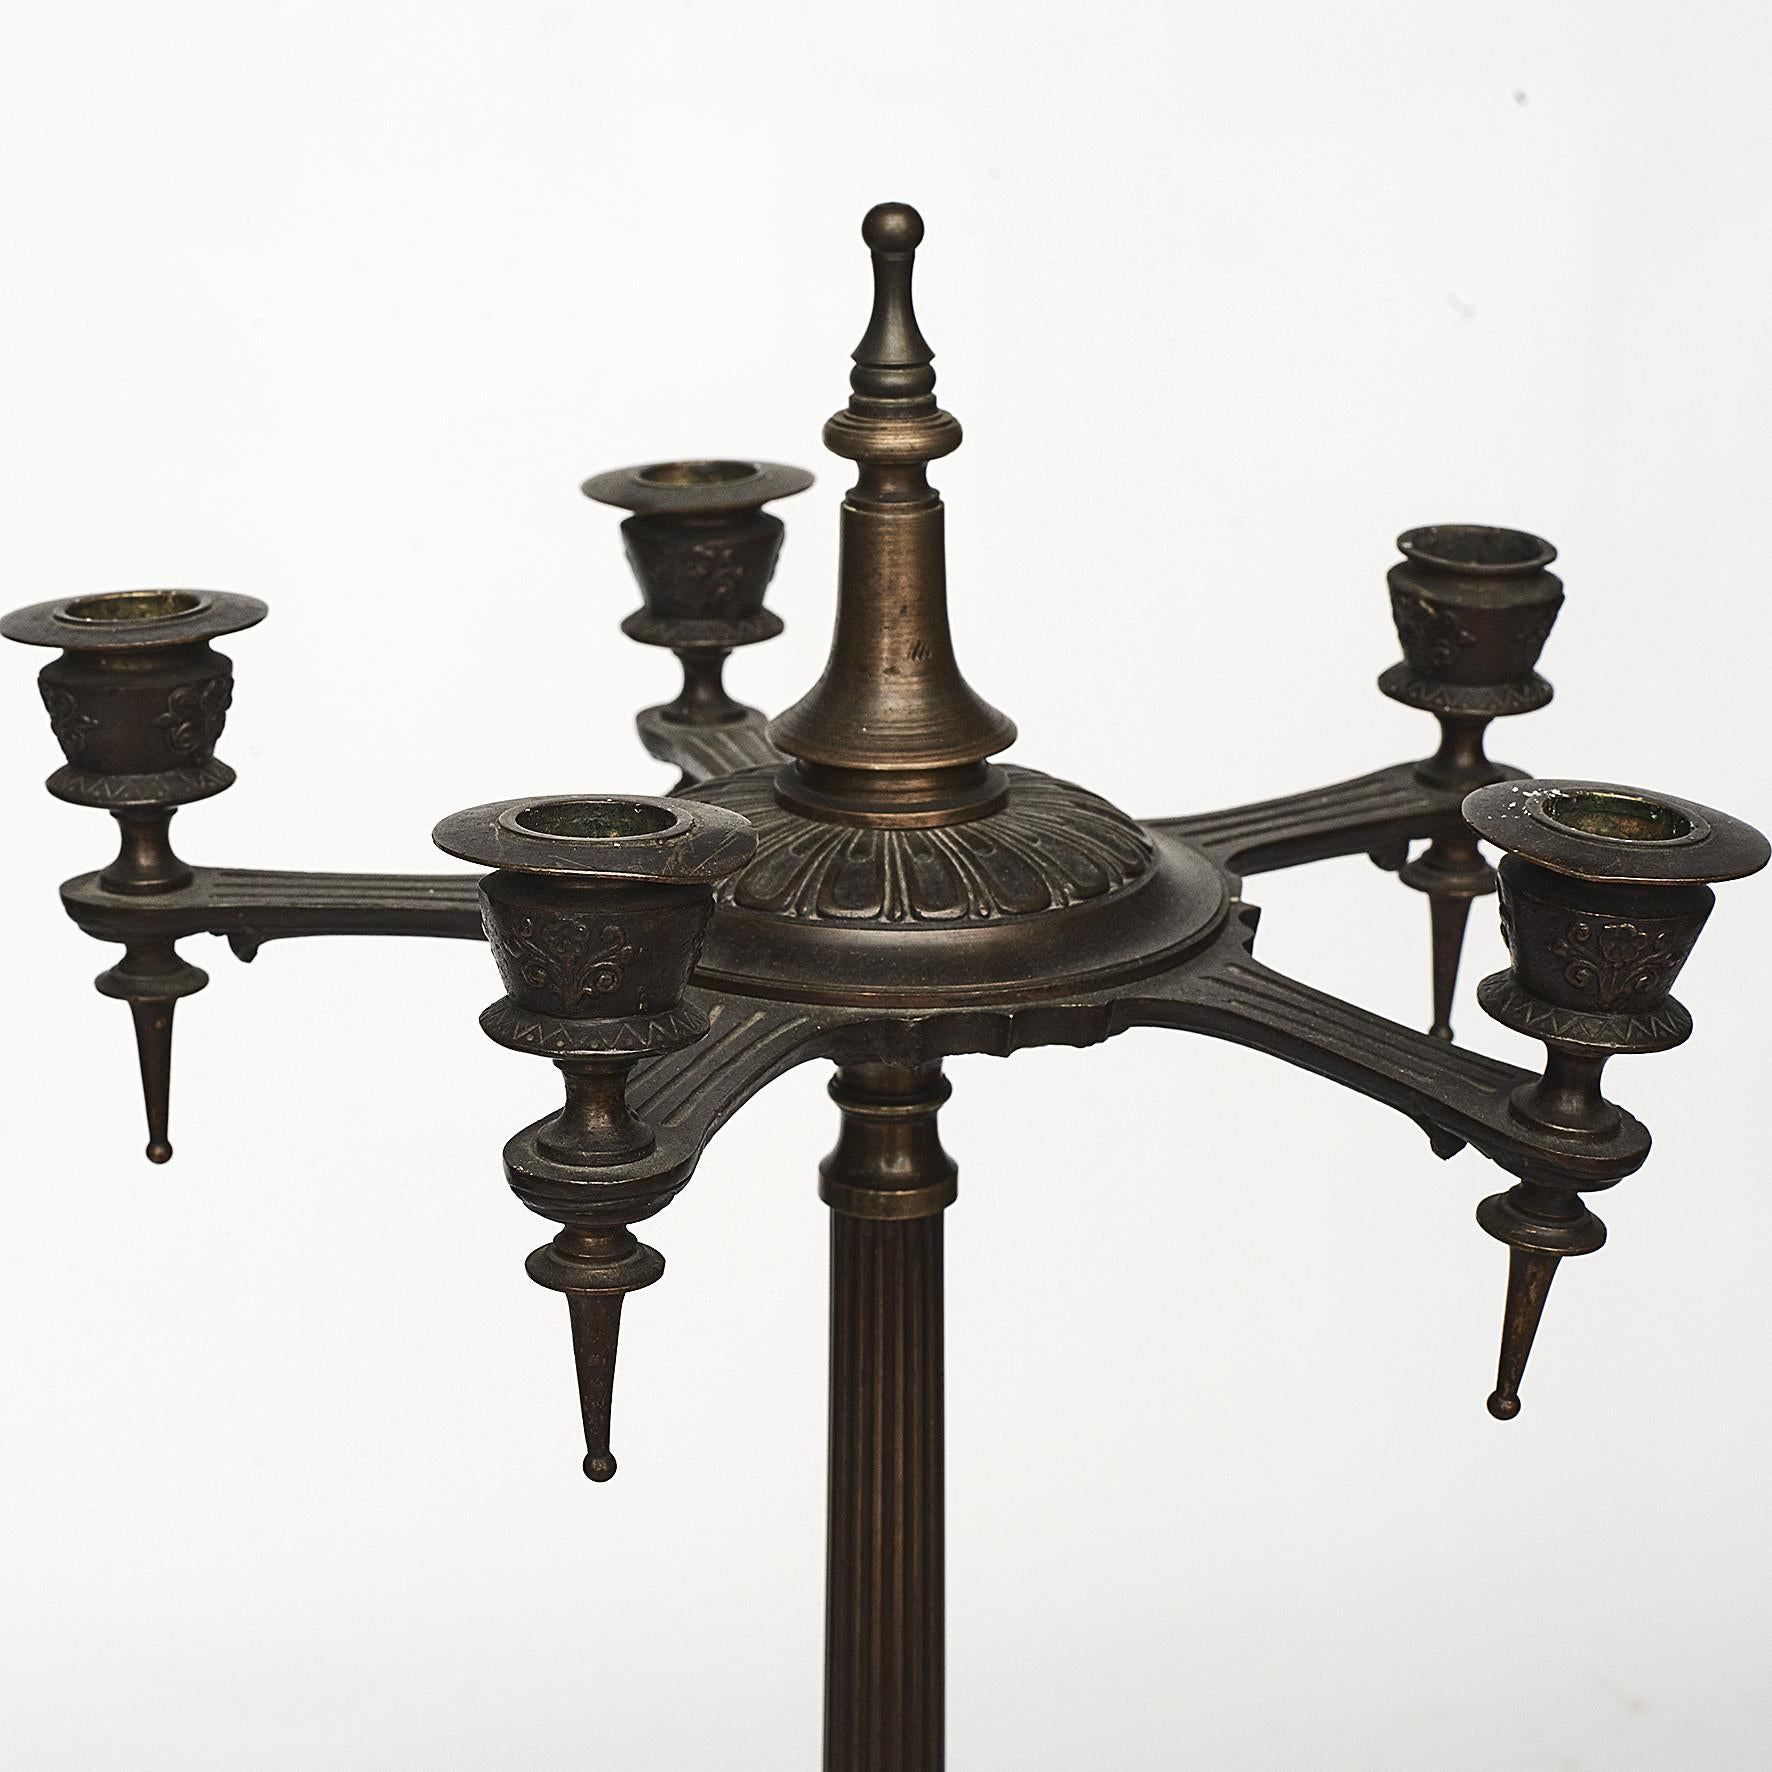 Pair of Italian Pompeian style candelabras crafted in patinated bronze.
Five candle arms with detachable bobeches.
Fluted column supported on a tripod base with animal's paws.
Italy mid-19th century.
Sold as a pair.